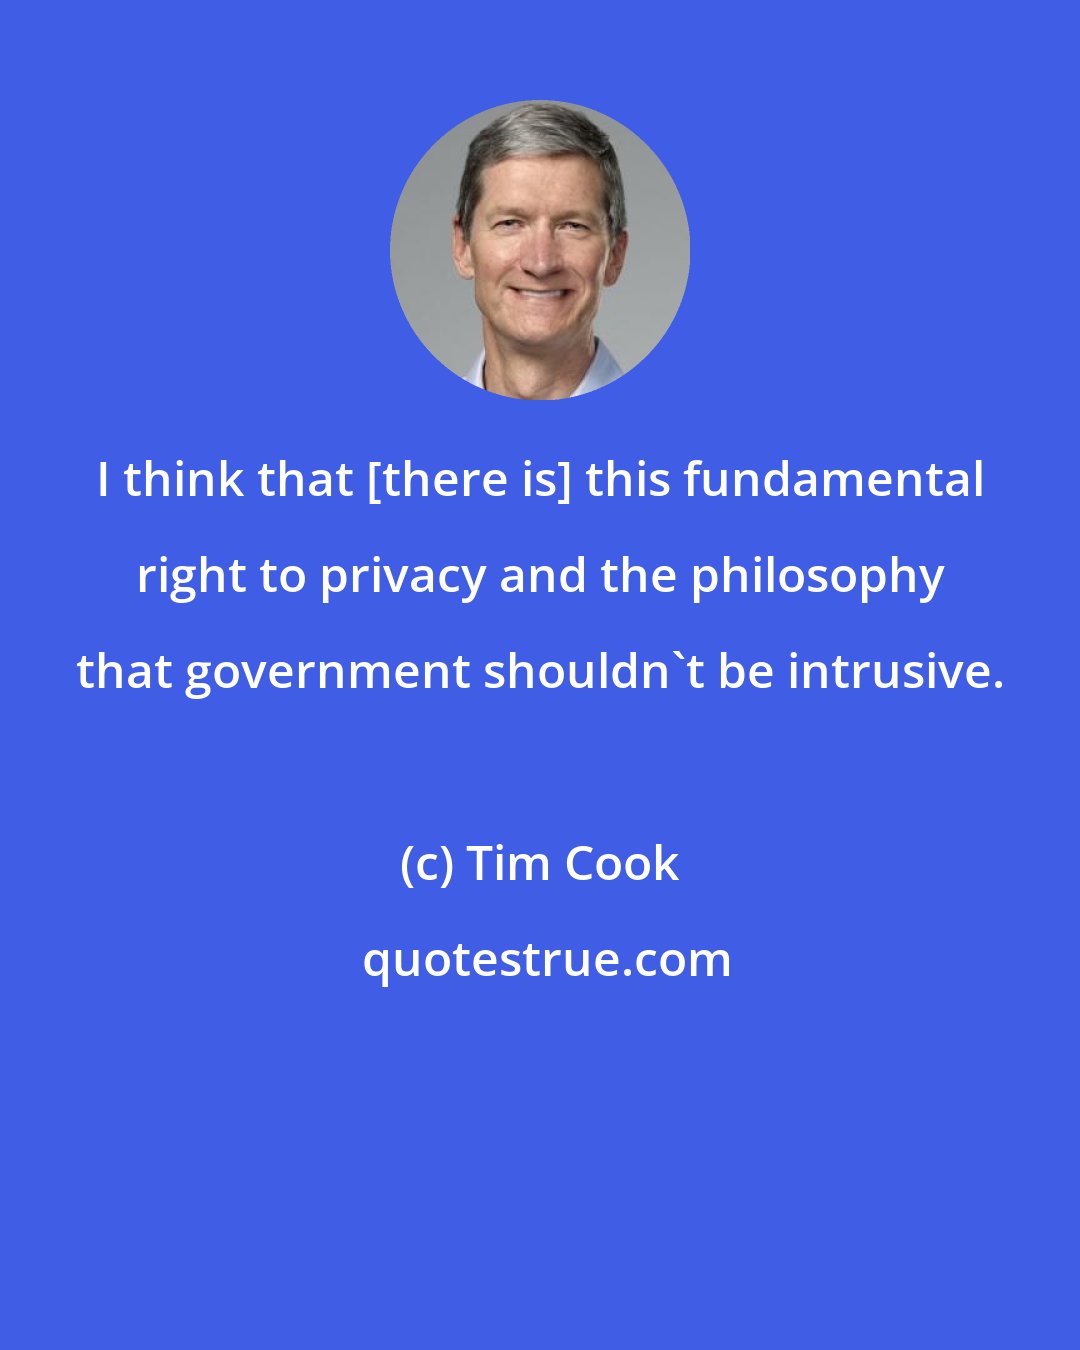 Tim Cook: I think that [there is] this fundamental right to privacy and the philosophy that government shouldn't be intrusive.